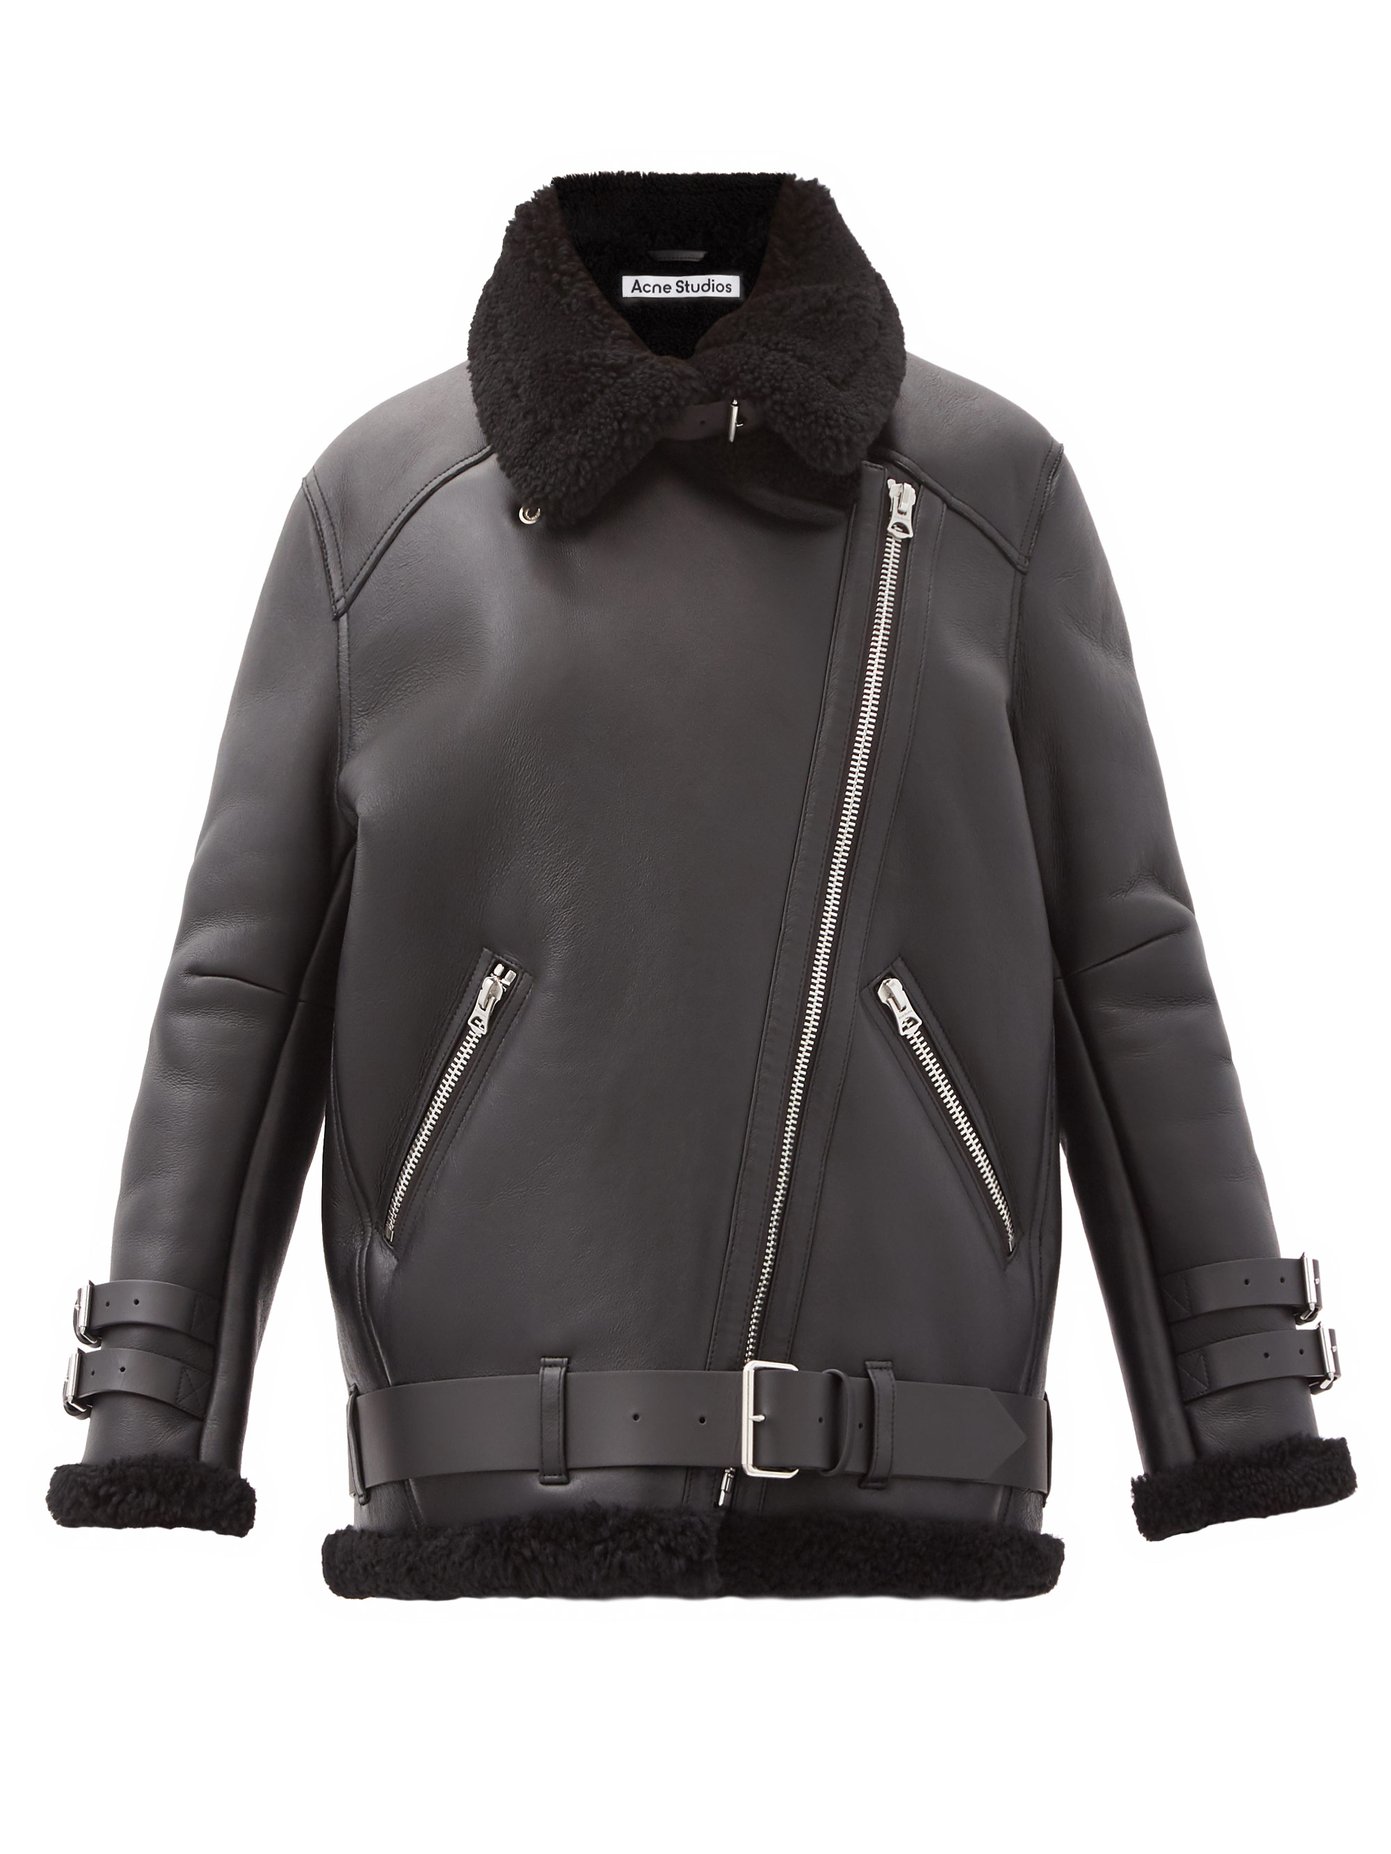 Acne Studios Shearling Leather Jacket